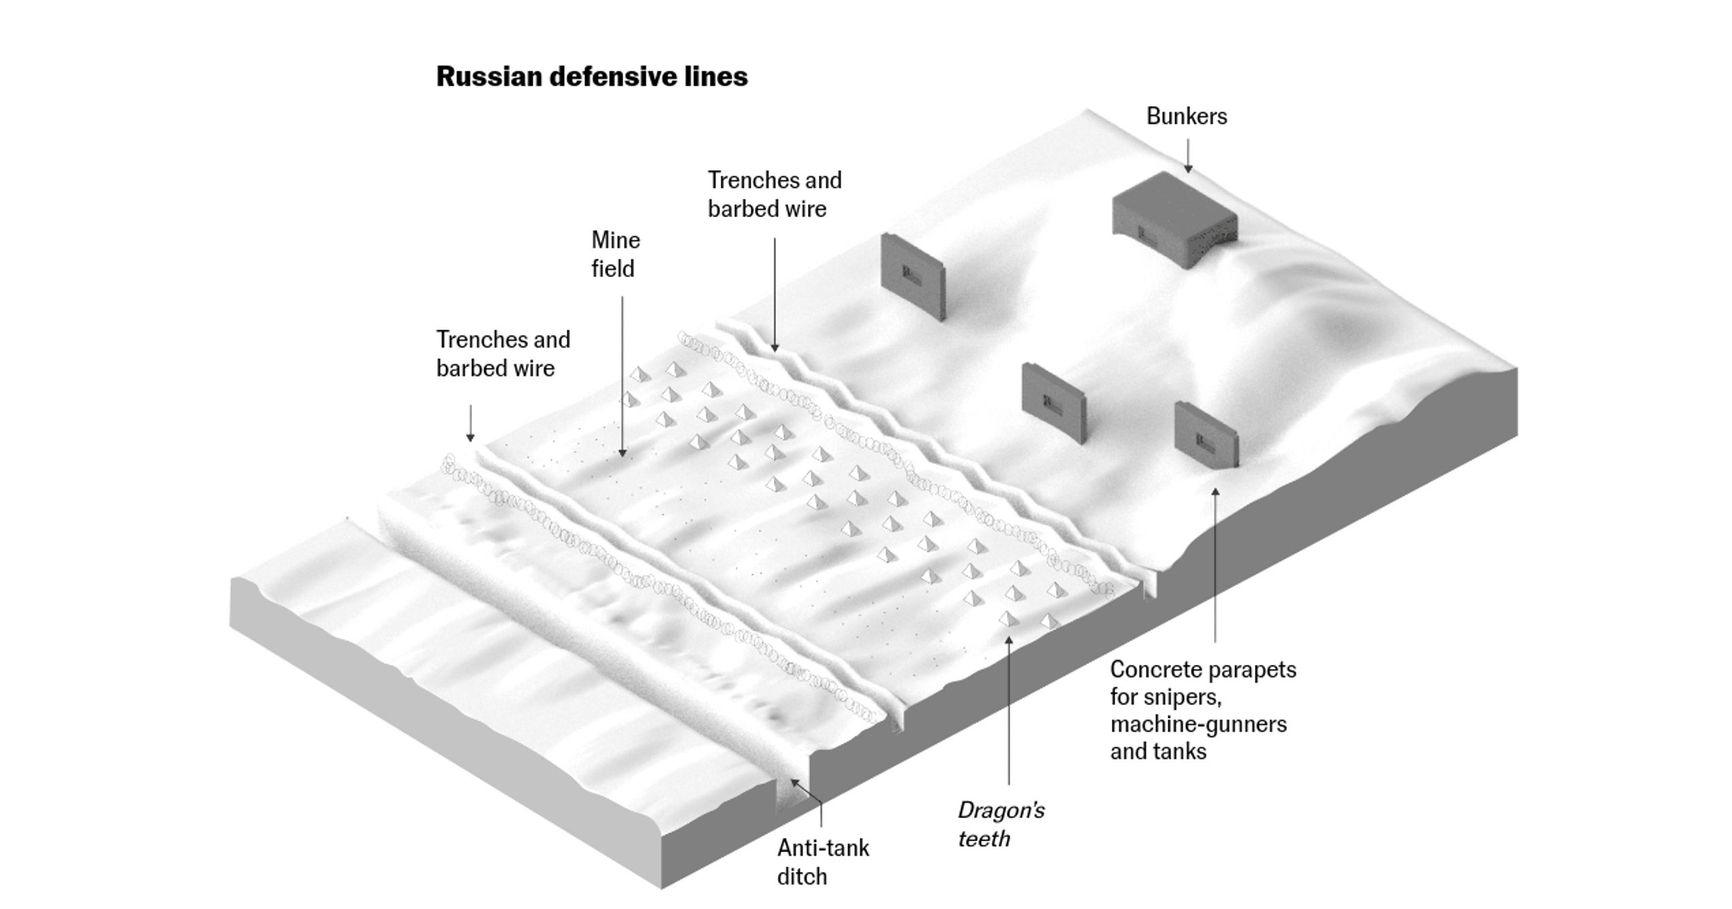 A typical configuration of Russian defense lines in the Zaporizhzhia and Kherson regions